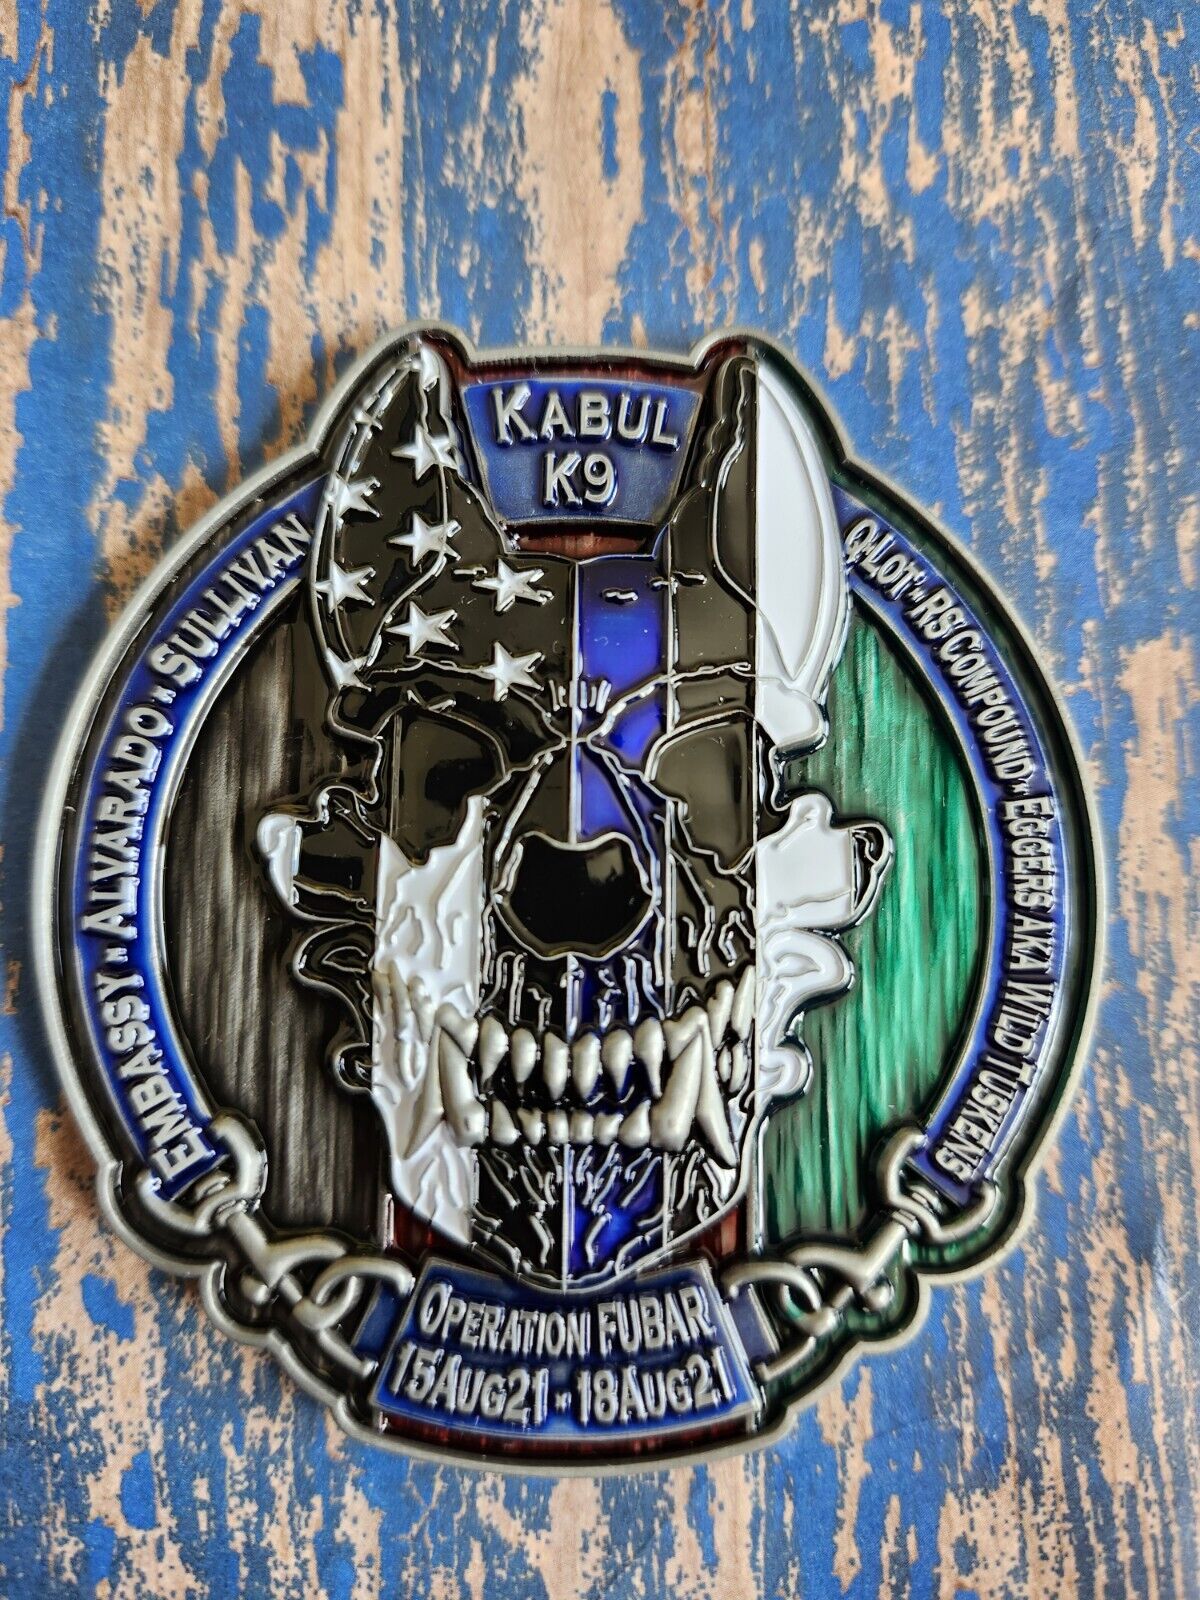 Limited Edition U.S. Embassy Kabul K9 Challenge Coin